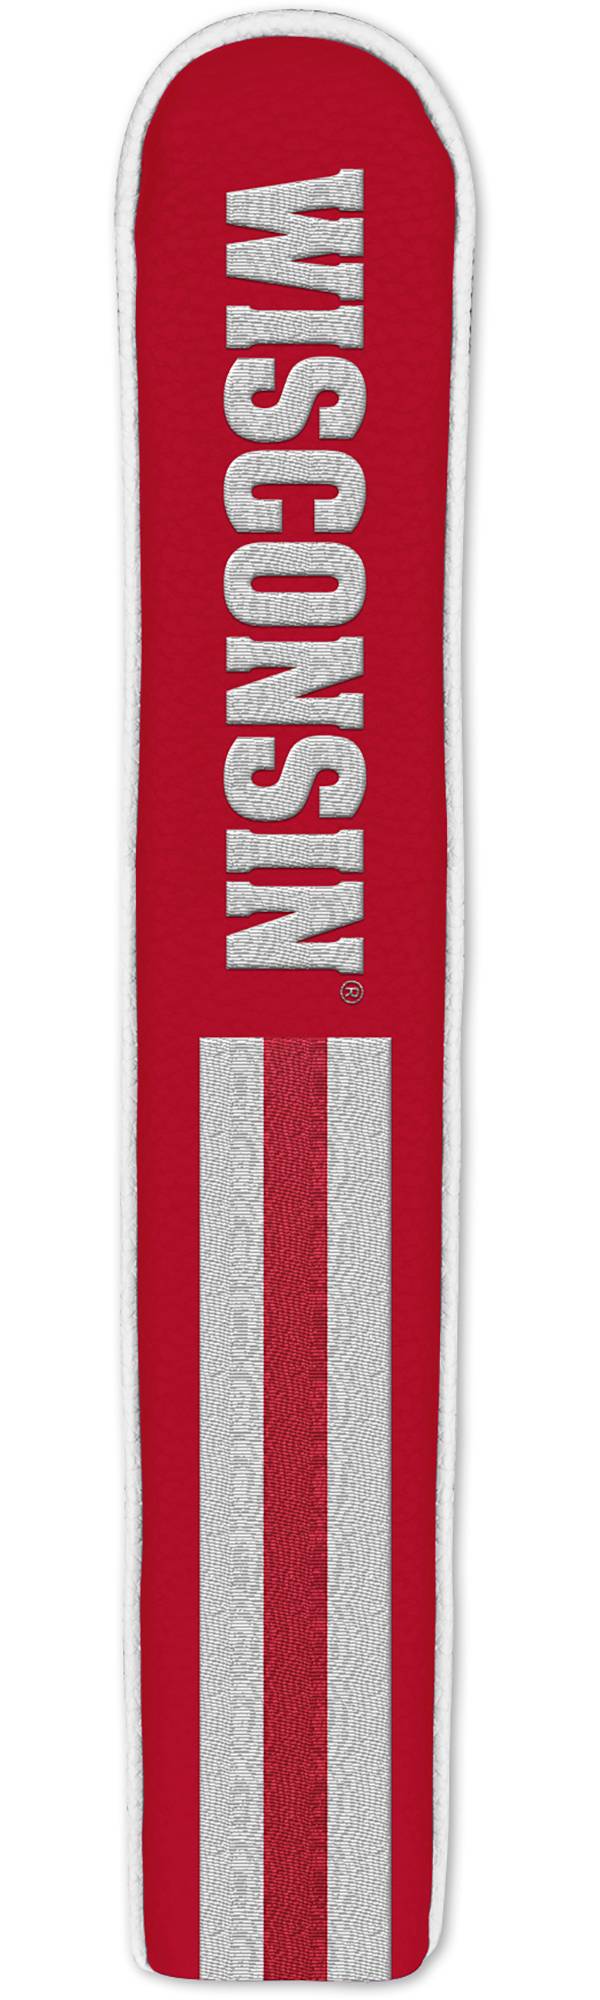 Team Effort Wisconsin Badgers Alignment Stick Cover product image